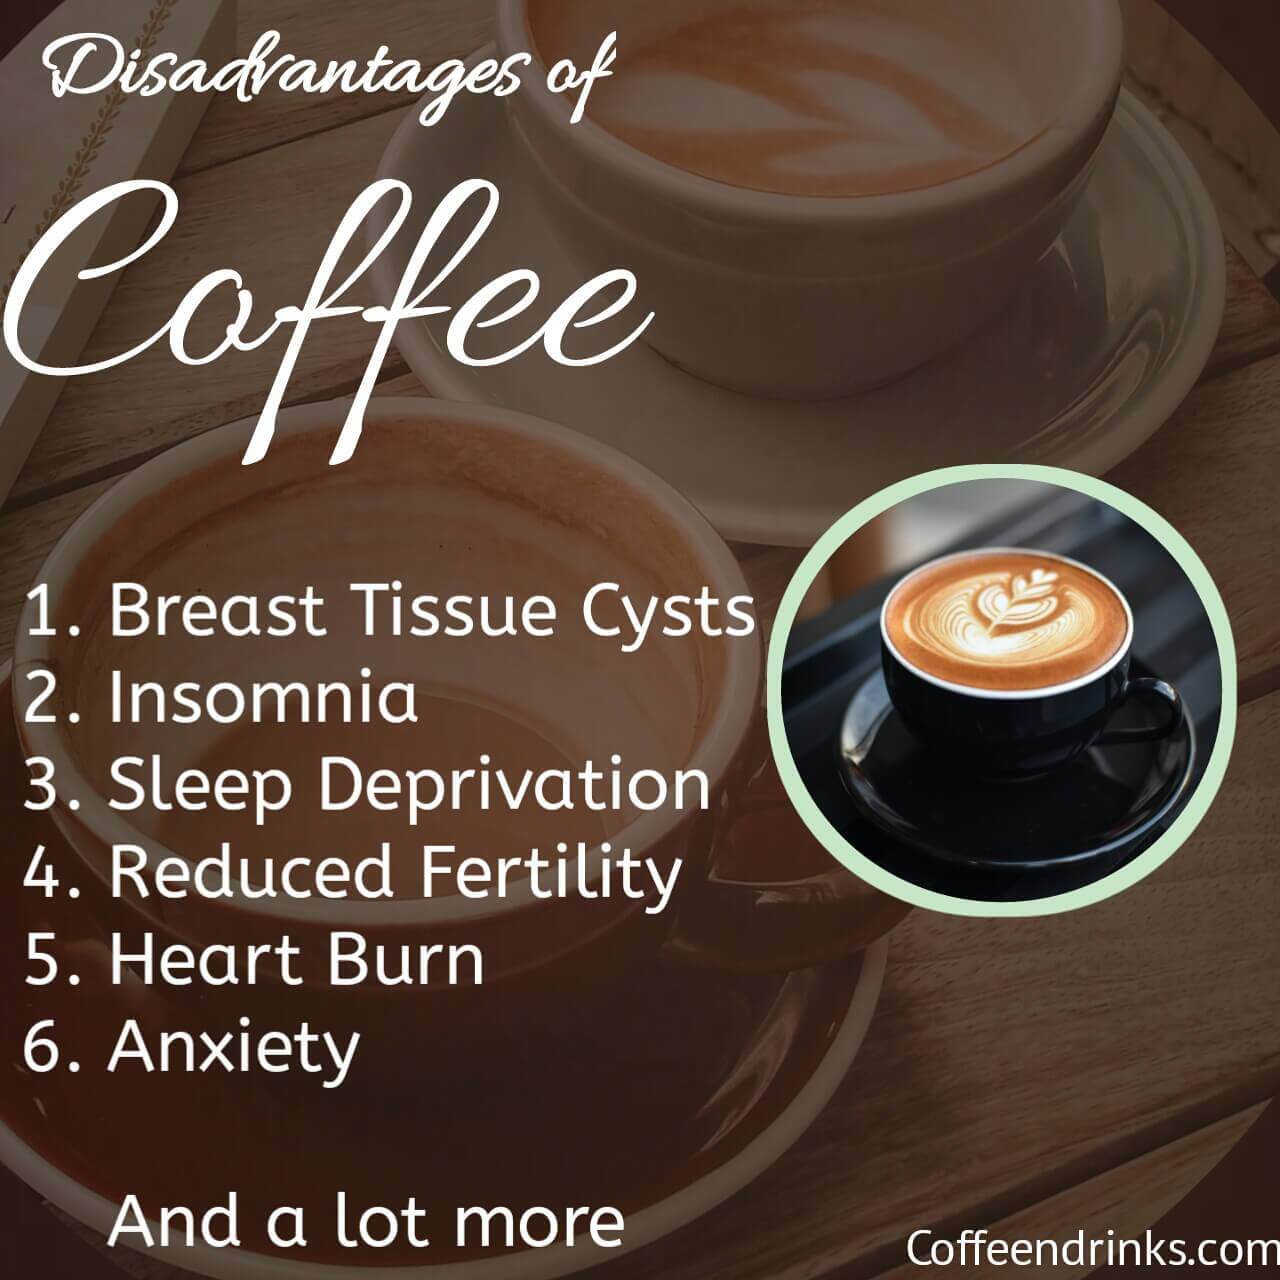 What are the Disadvantages of Coffee Drinking?